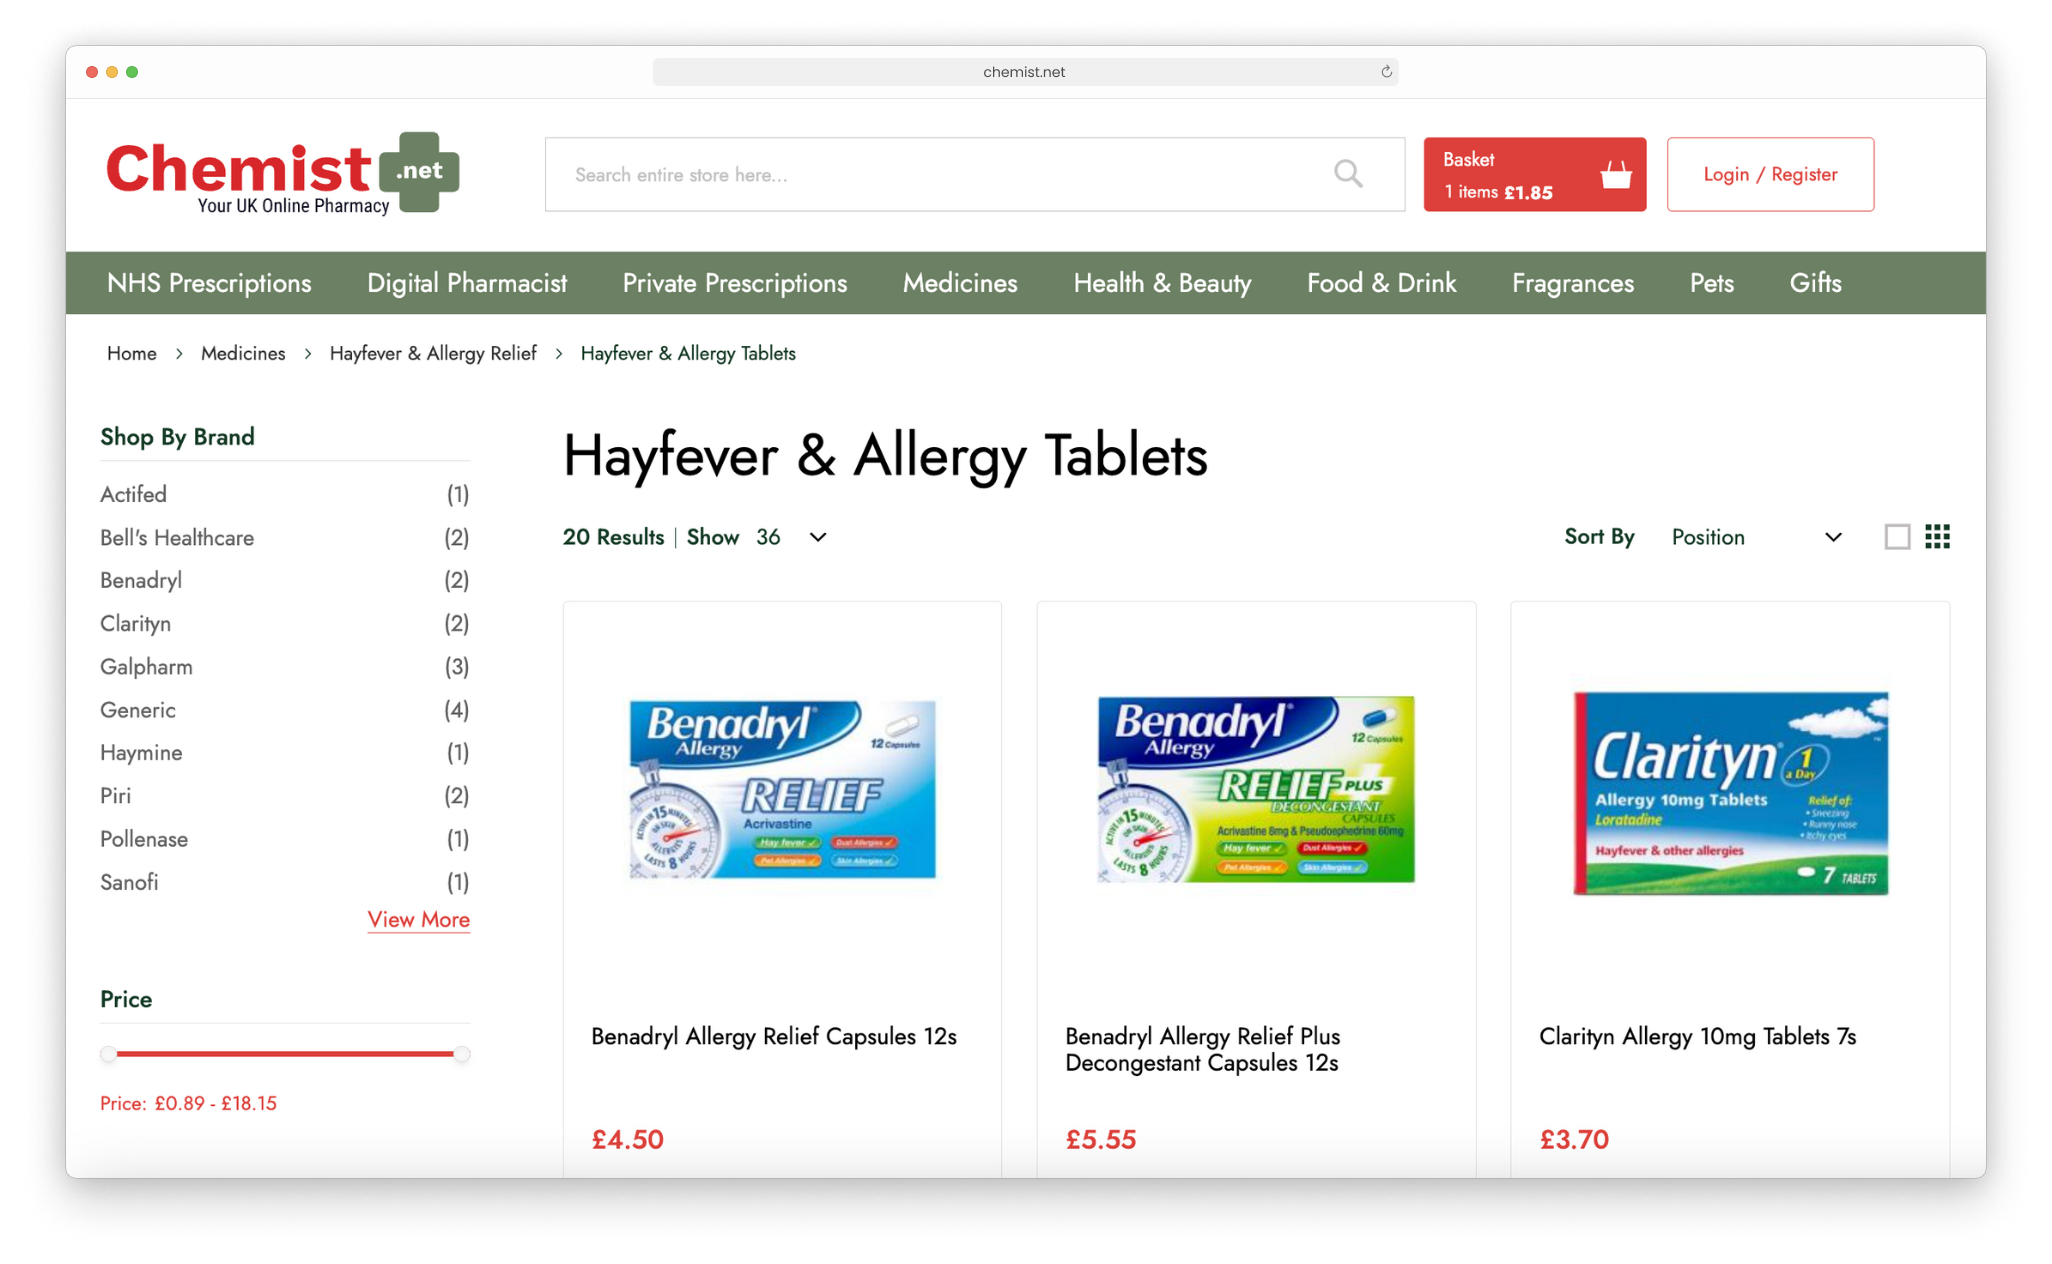 Chemist.net's range of medication as listed by product filters following Magento development work by magic42